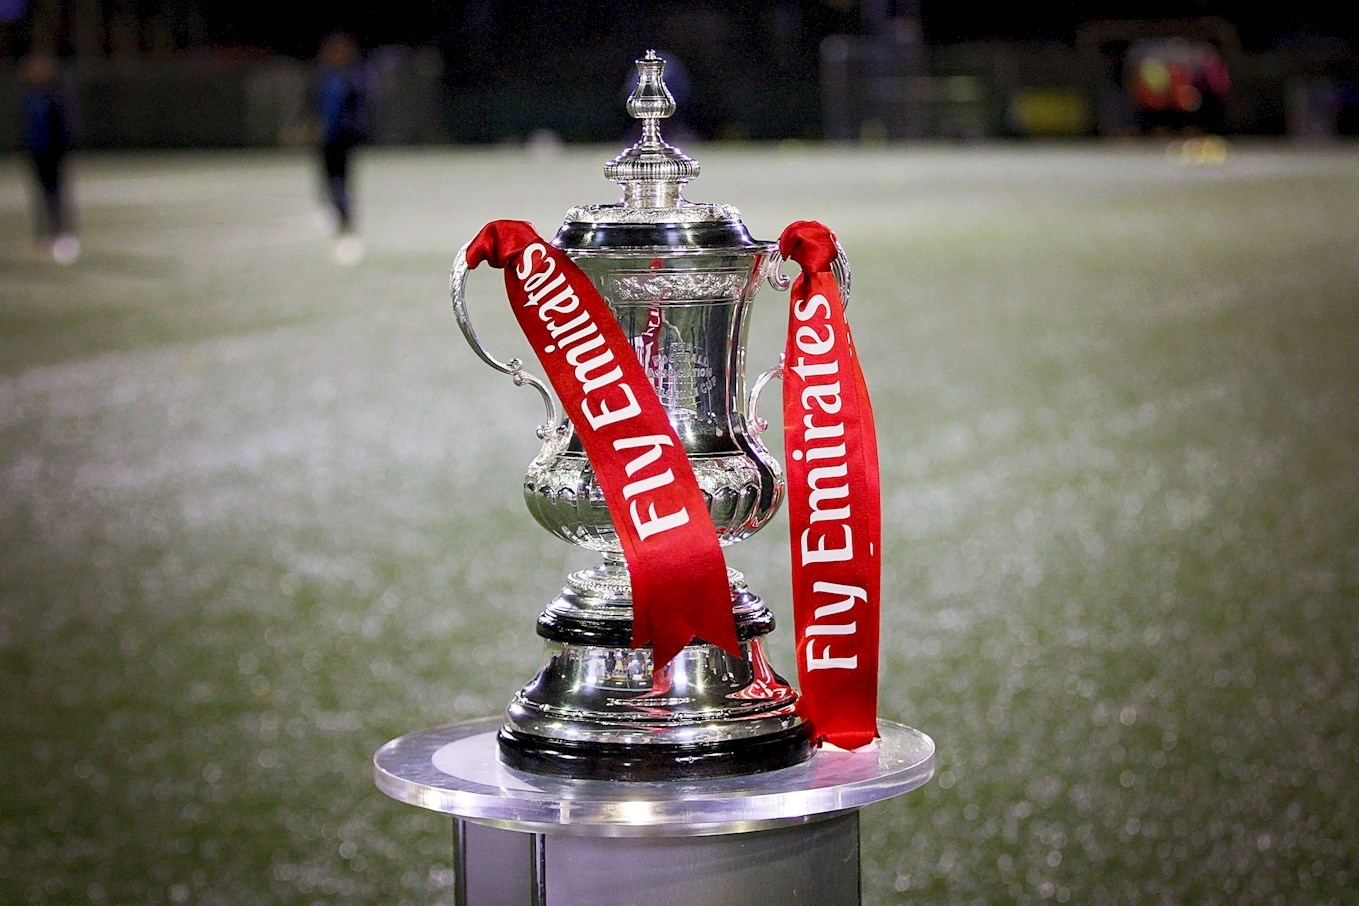 Dons selected for TV coverage in FA Cup second round - News